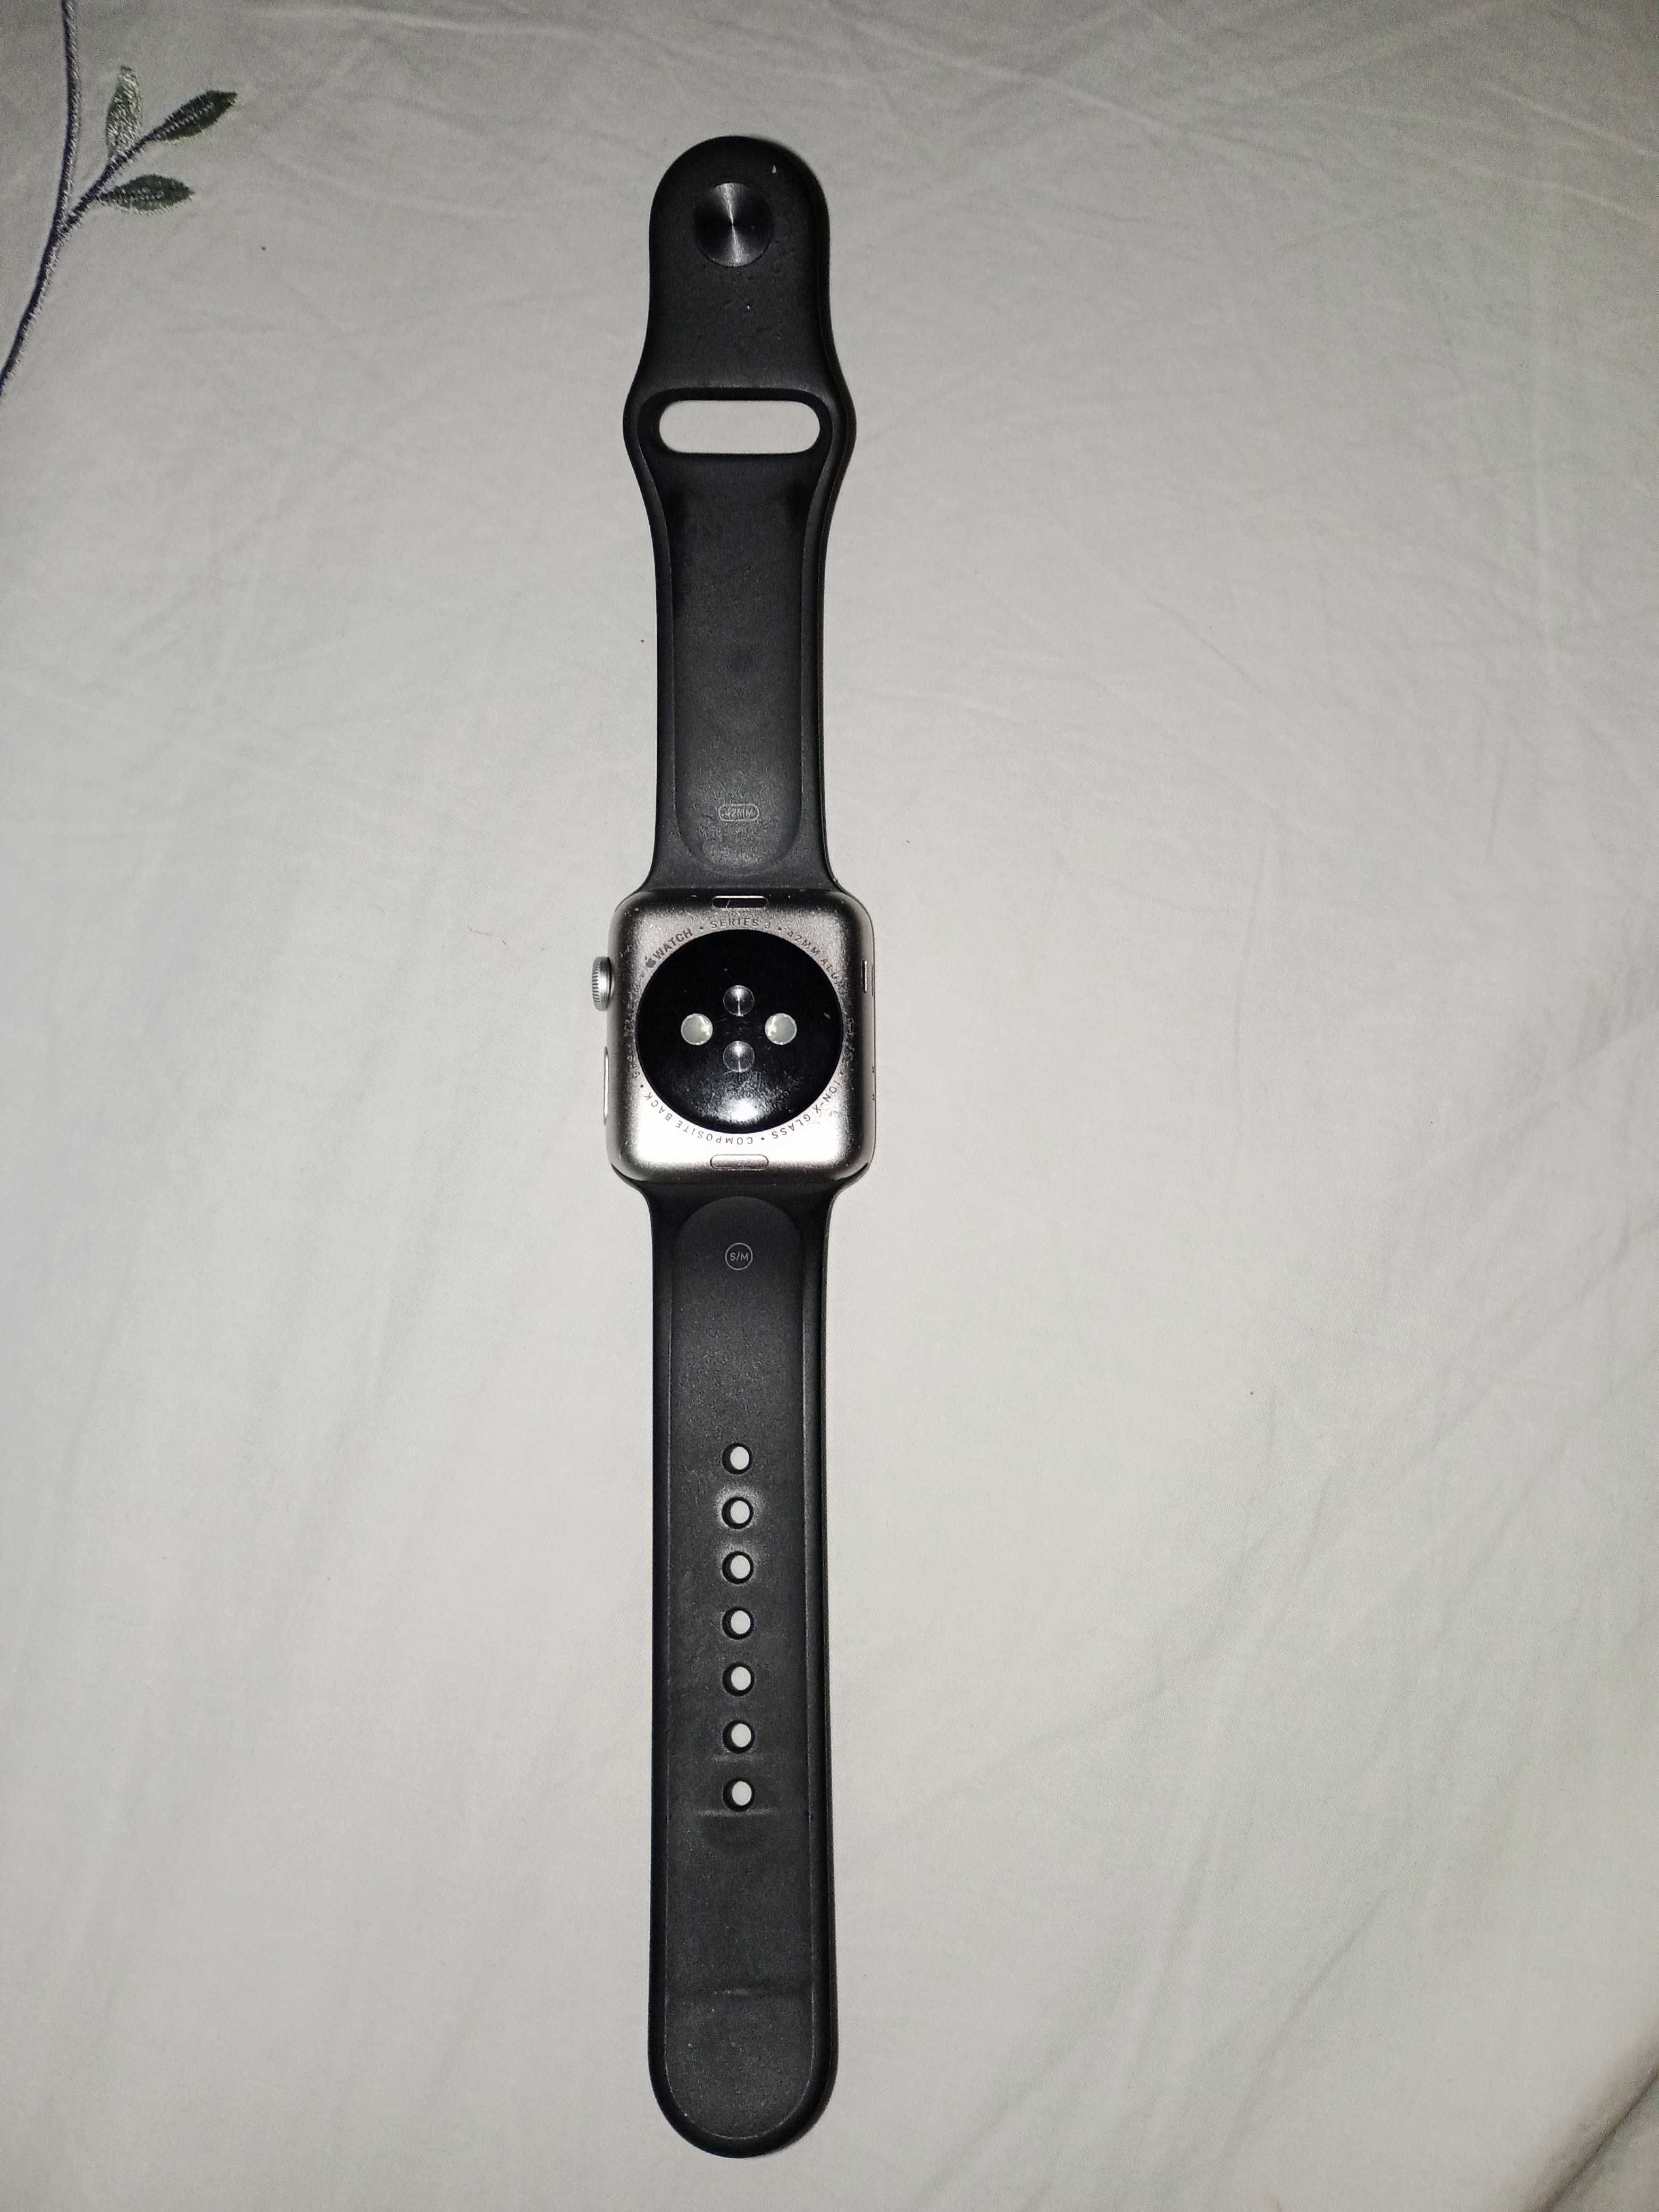 Aplle watch 3 42mm